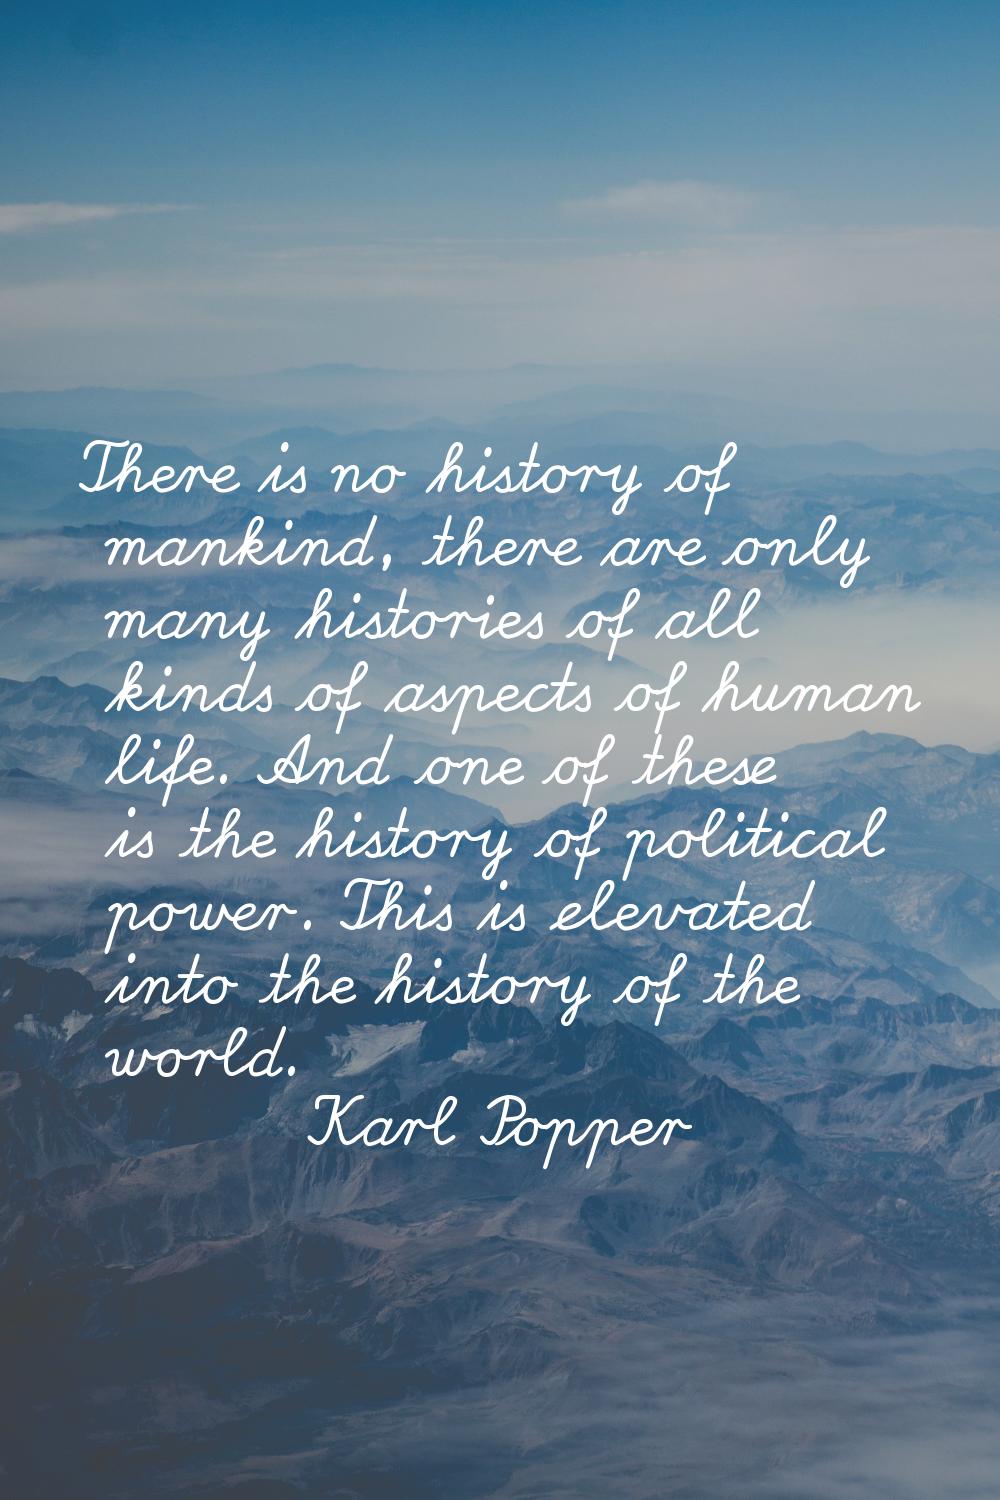 There is no history of mankind, there are only many histories of all kinds of aspects of human life